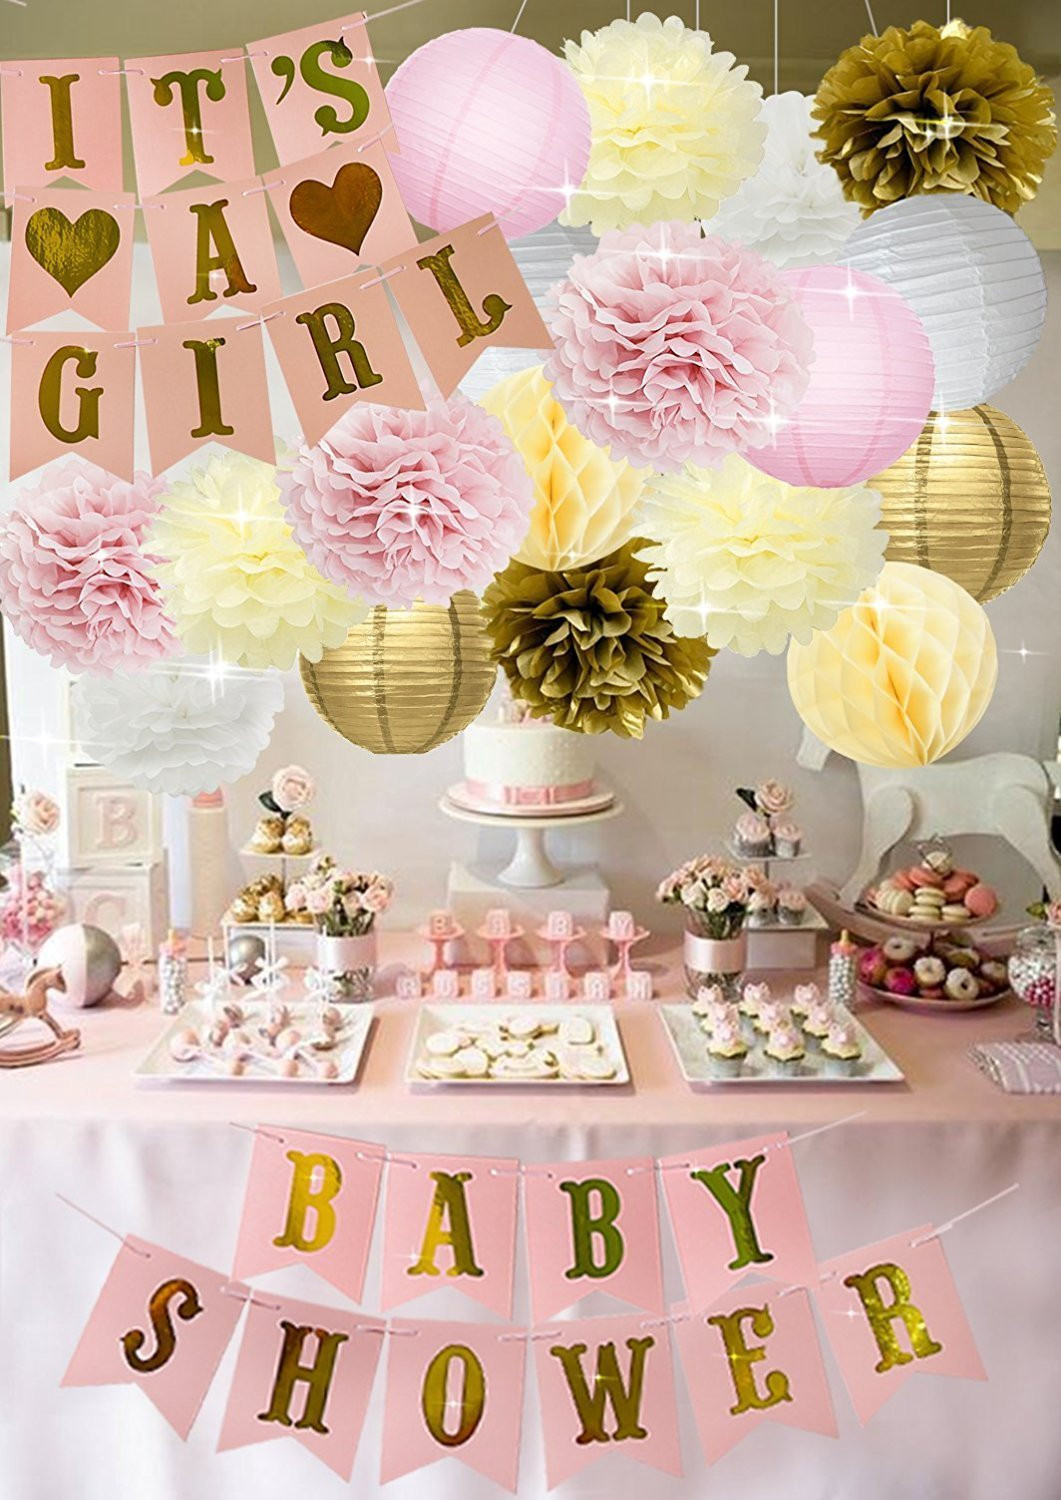 Baby Shower Decoration Ideas For Girls
 Baby Shower Decorations BABY SHOWER IT S A GIRL Garland